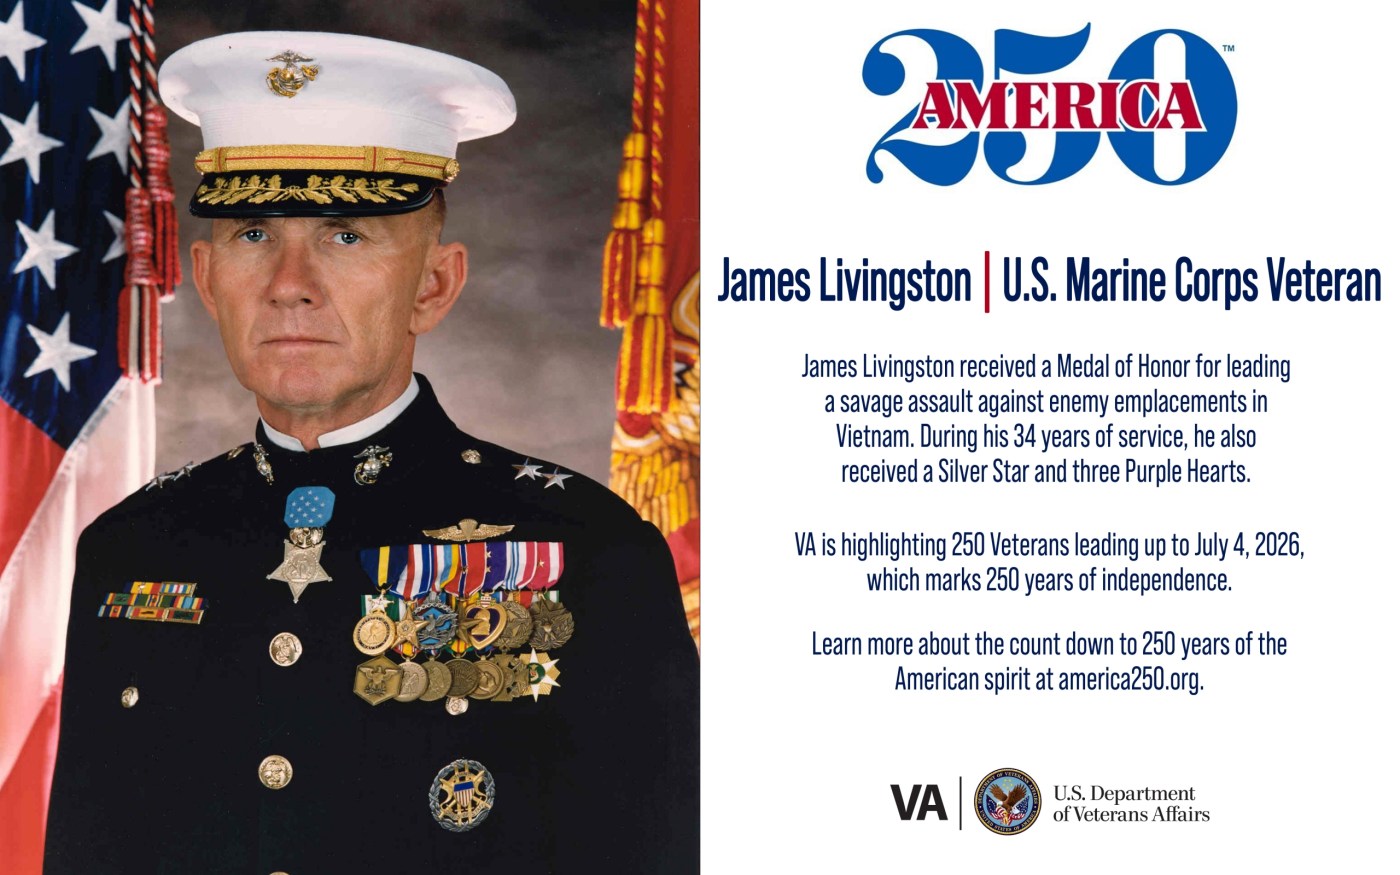 This week’s America250 salute is Marine Corps Veteran James Livingston, who received a Medal of Honor during Vietnam and served 34 years.